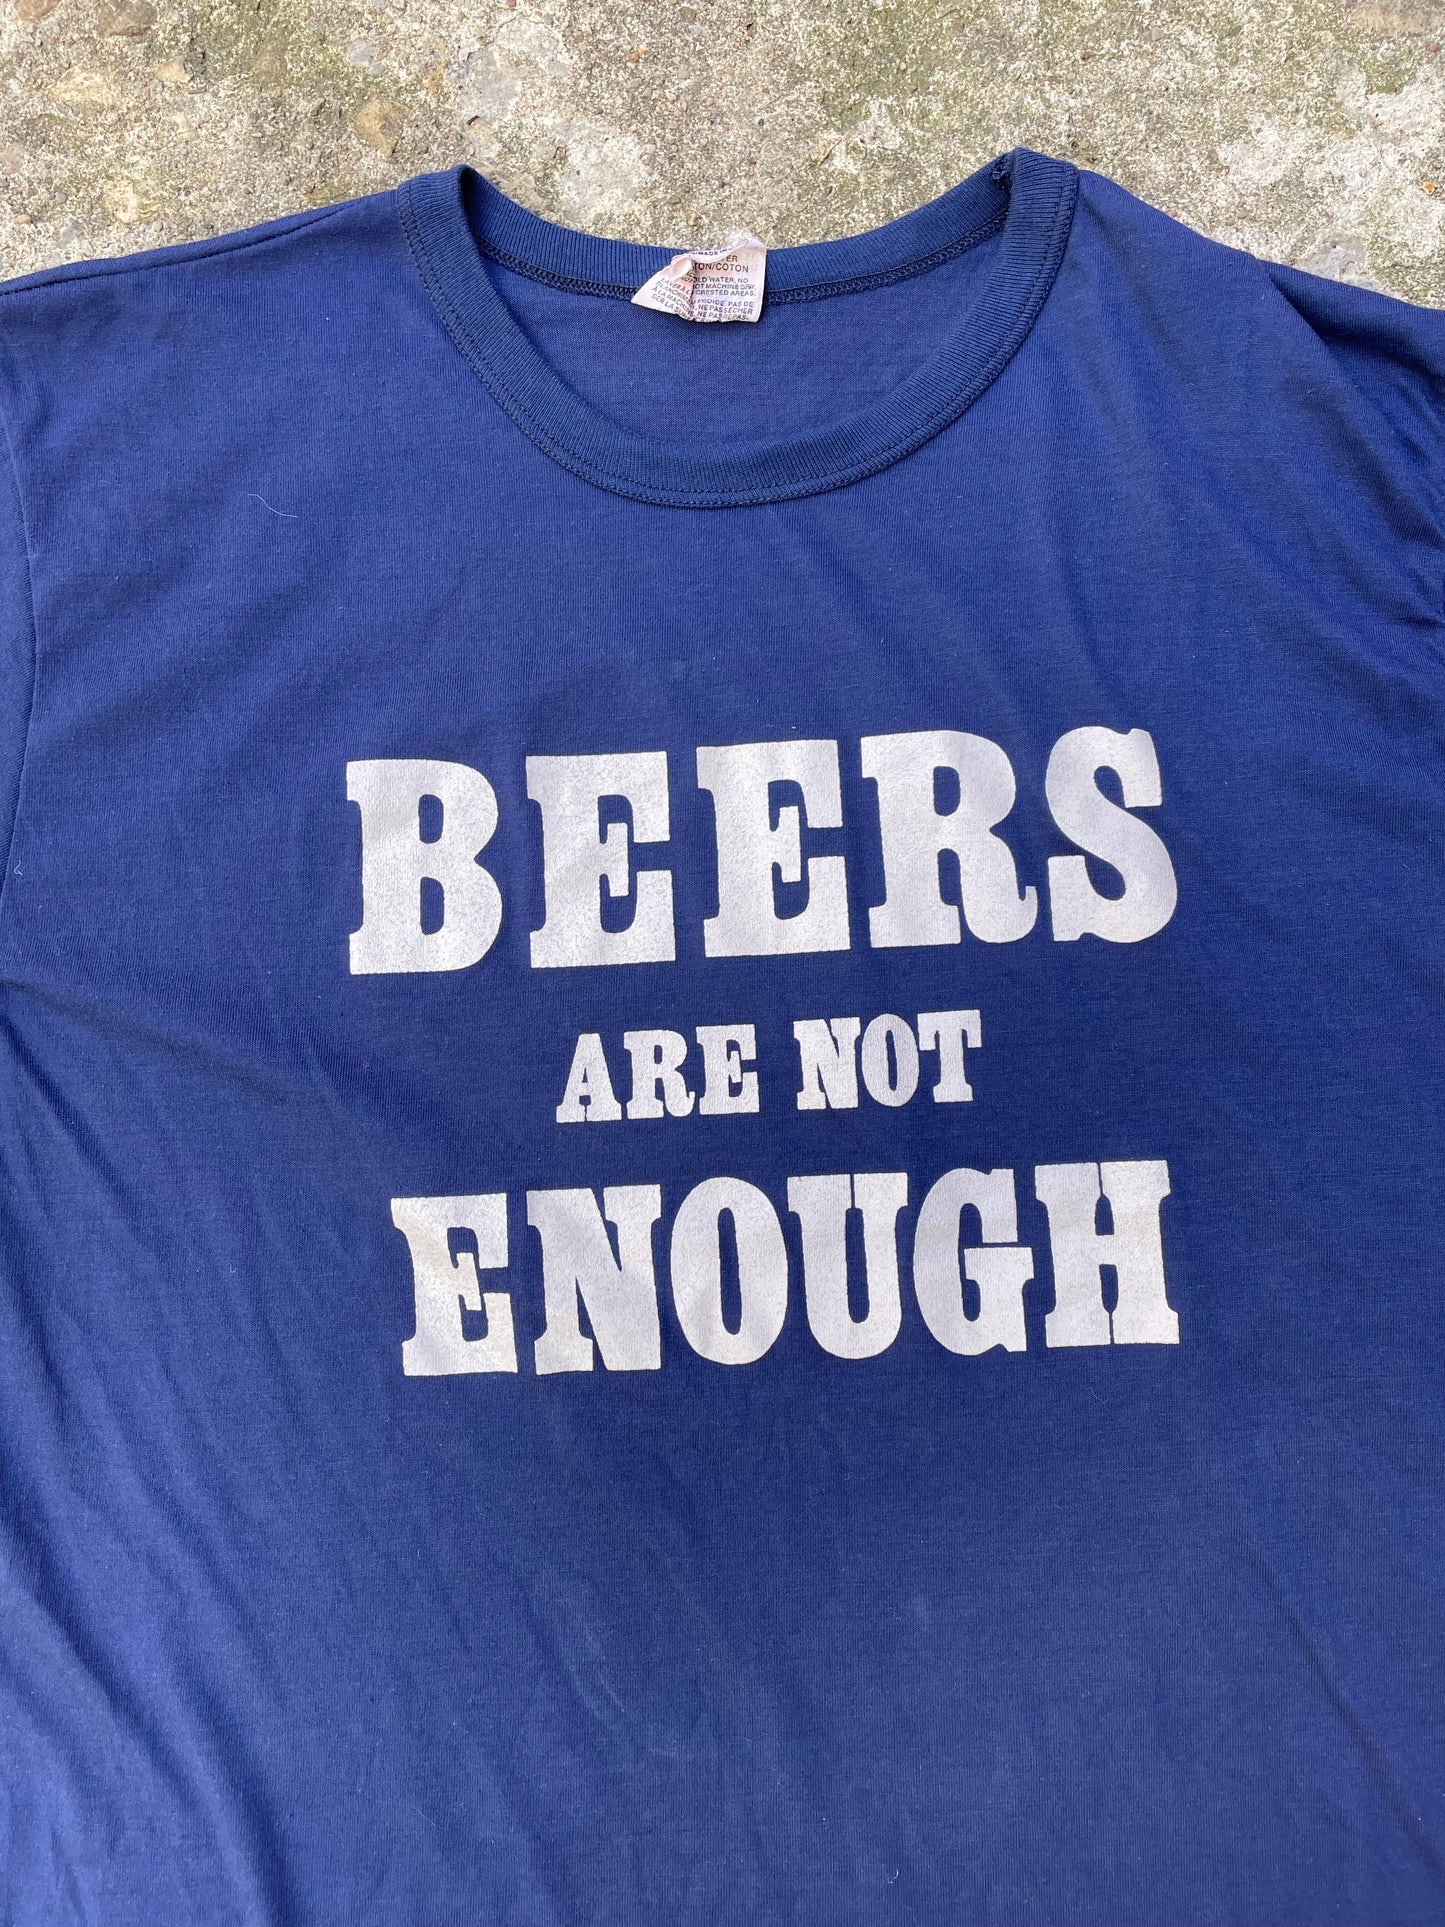 1980's 'Beers Are not Enough' Graphic T-Shirt - M